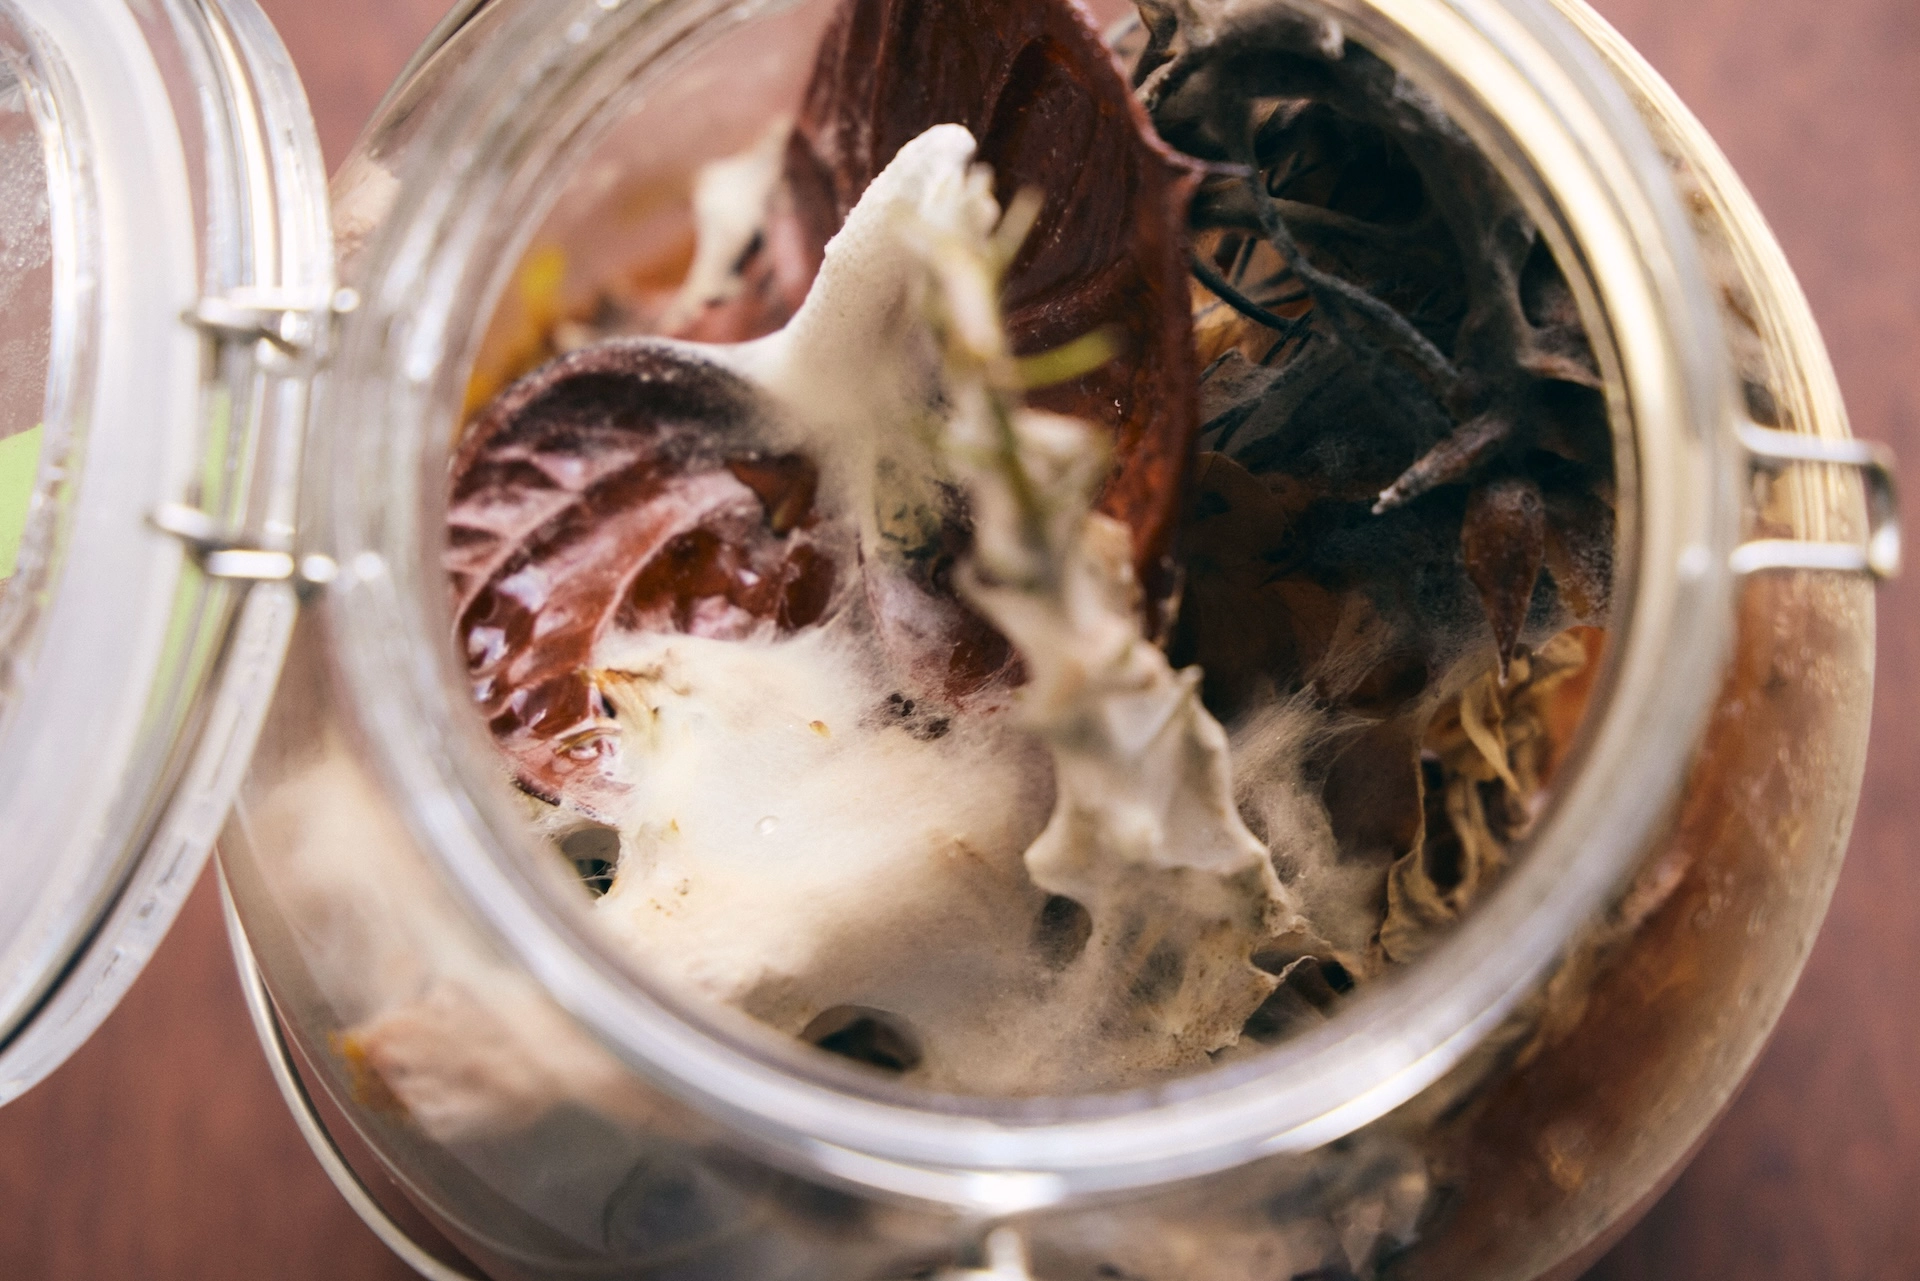 Wilted brown flowers and leaves with filamentous fungi are visible in the glass vessel.